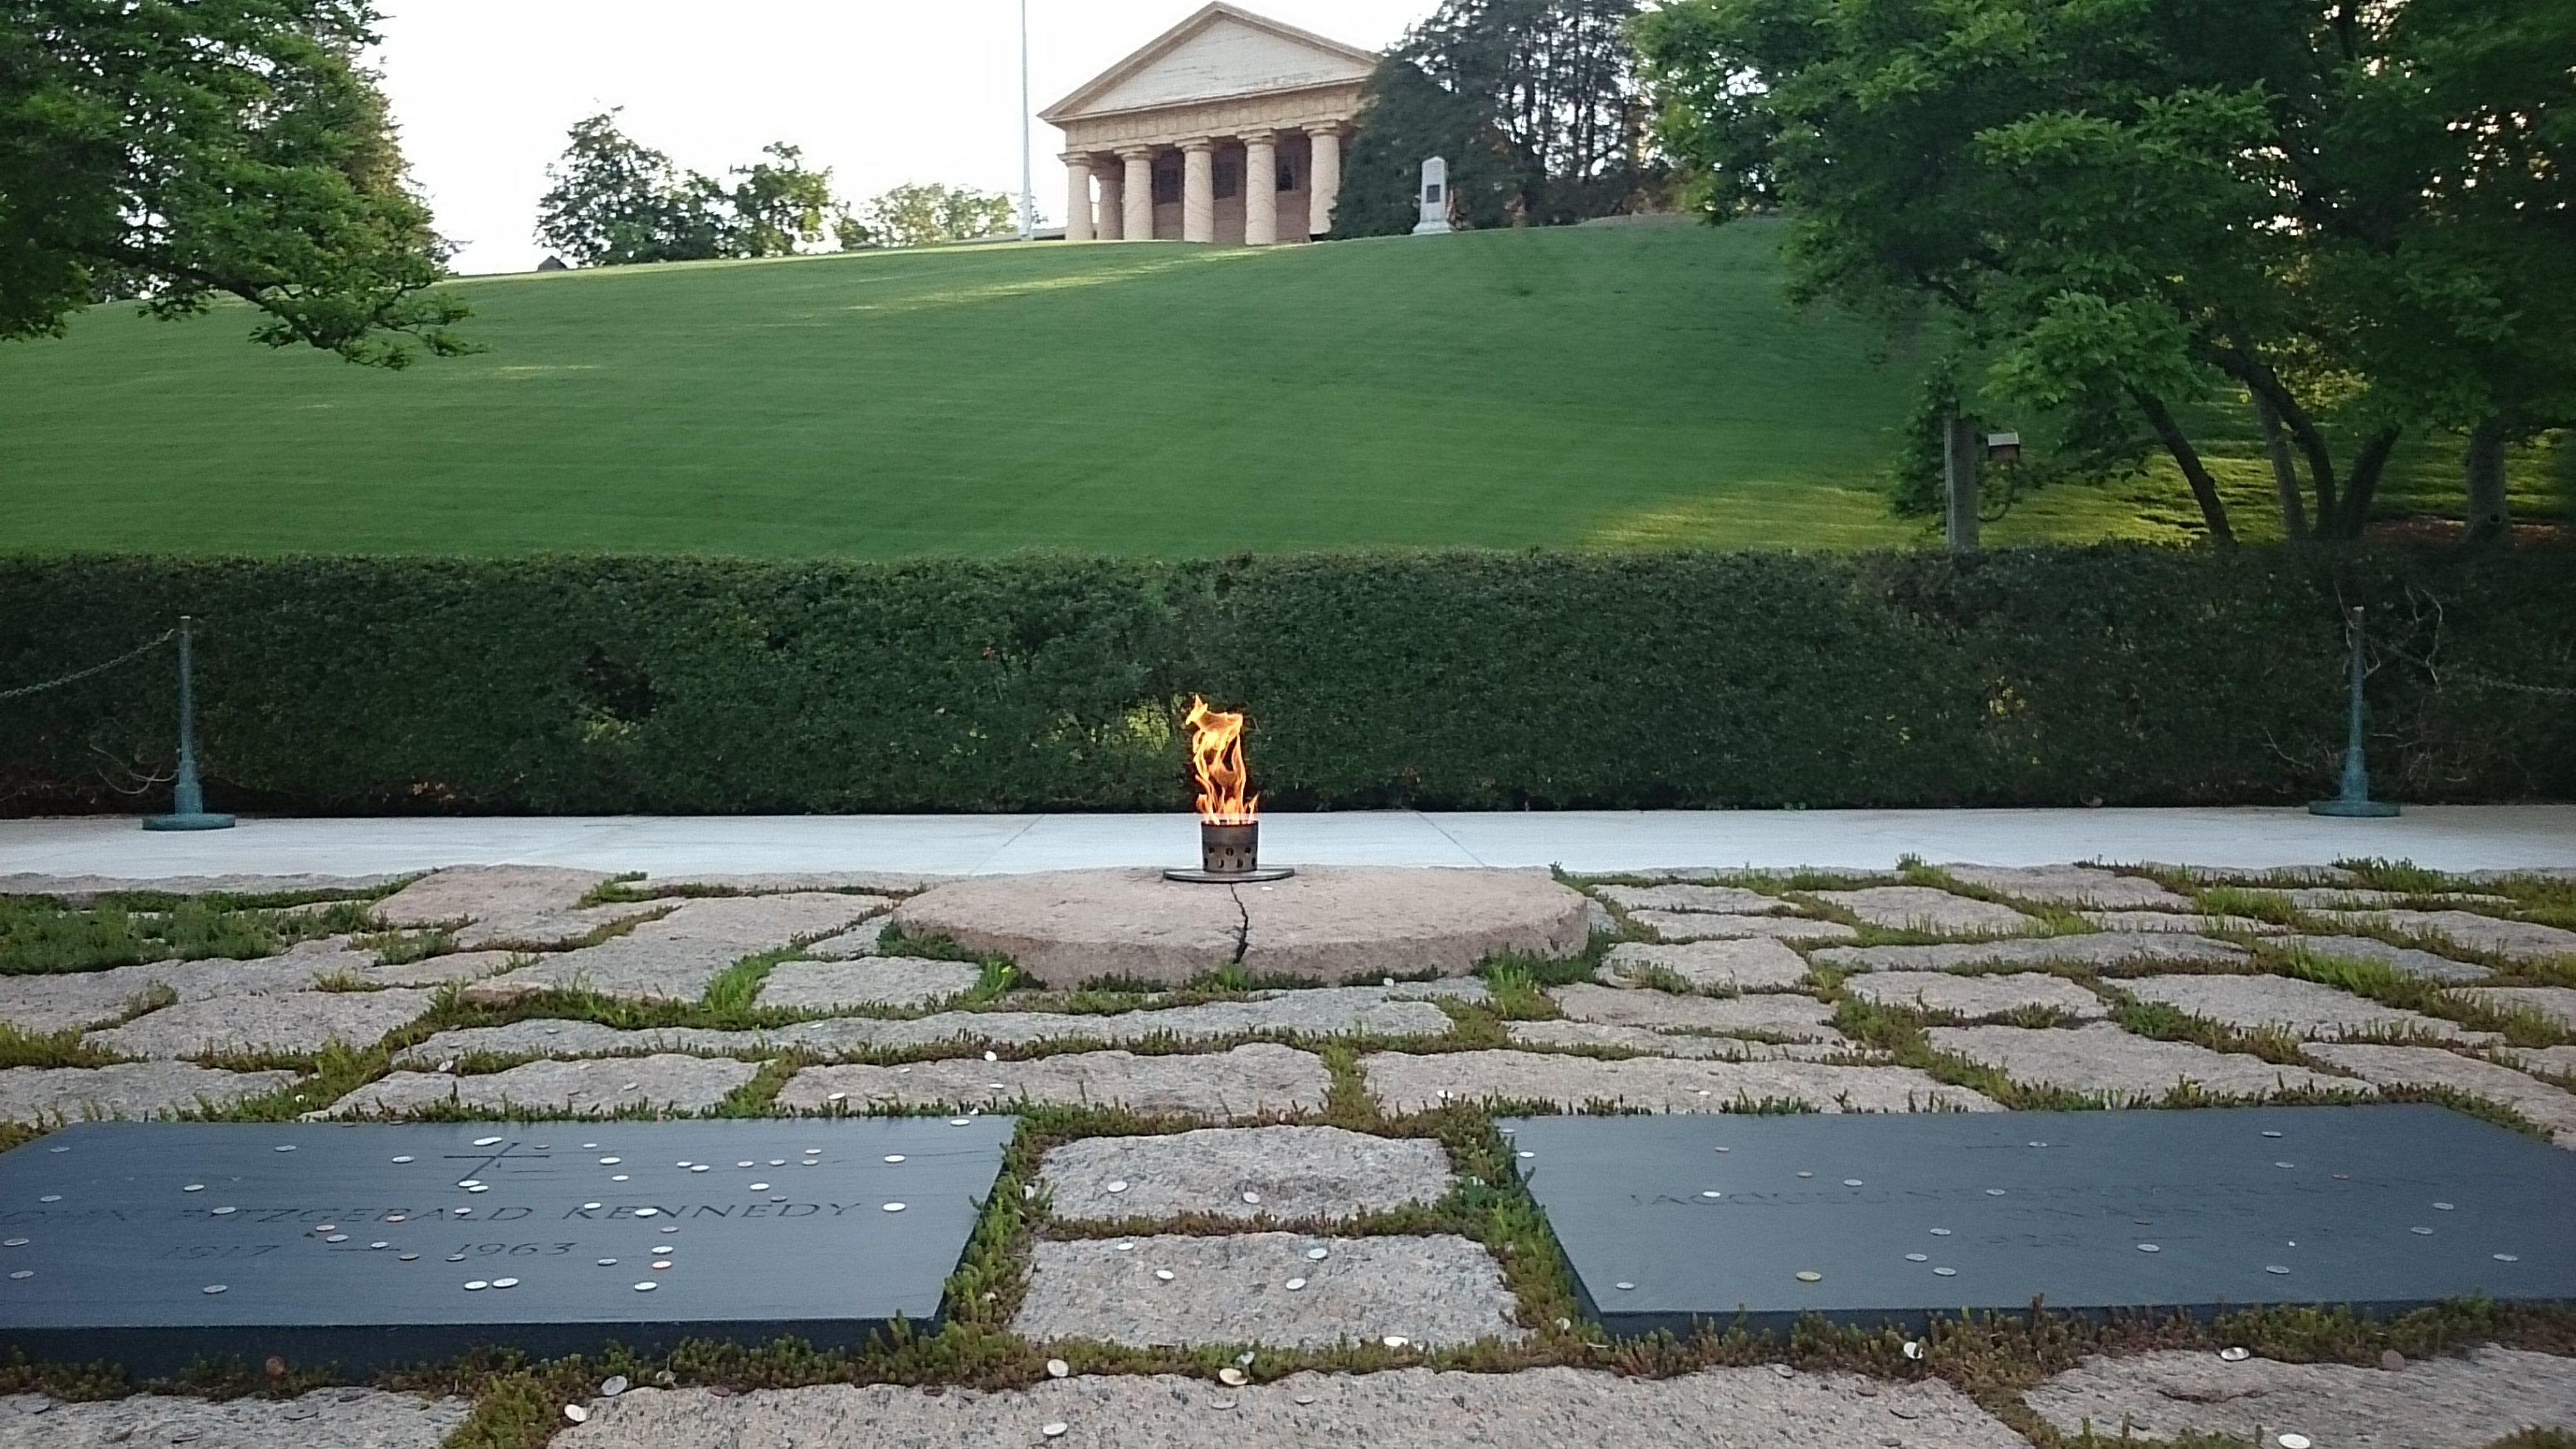 No better inspiration for veterans than the eternal flame at JFK's final resting place in Arlington, National Cemetery.